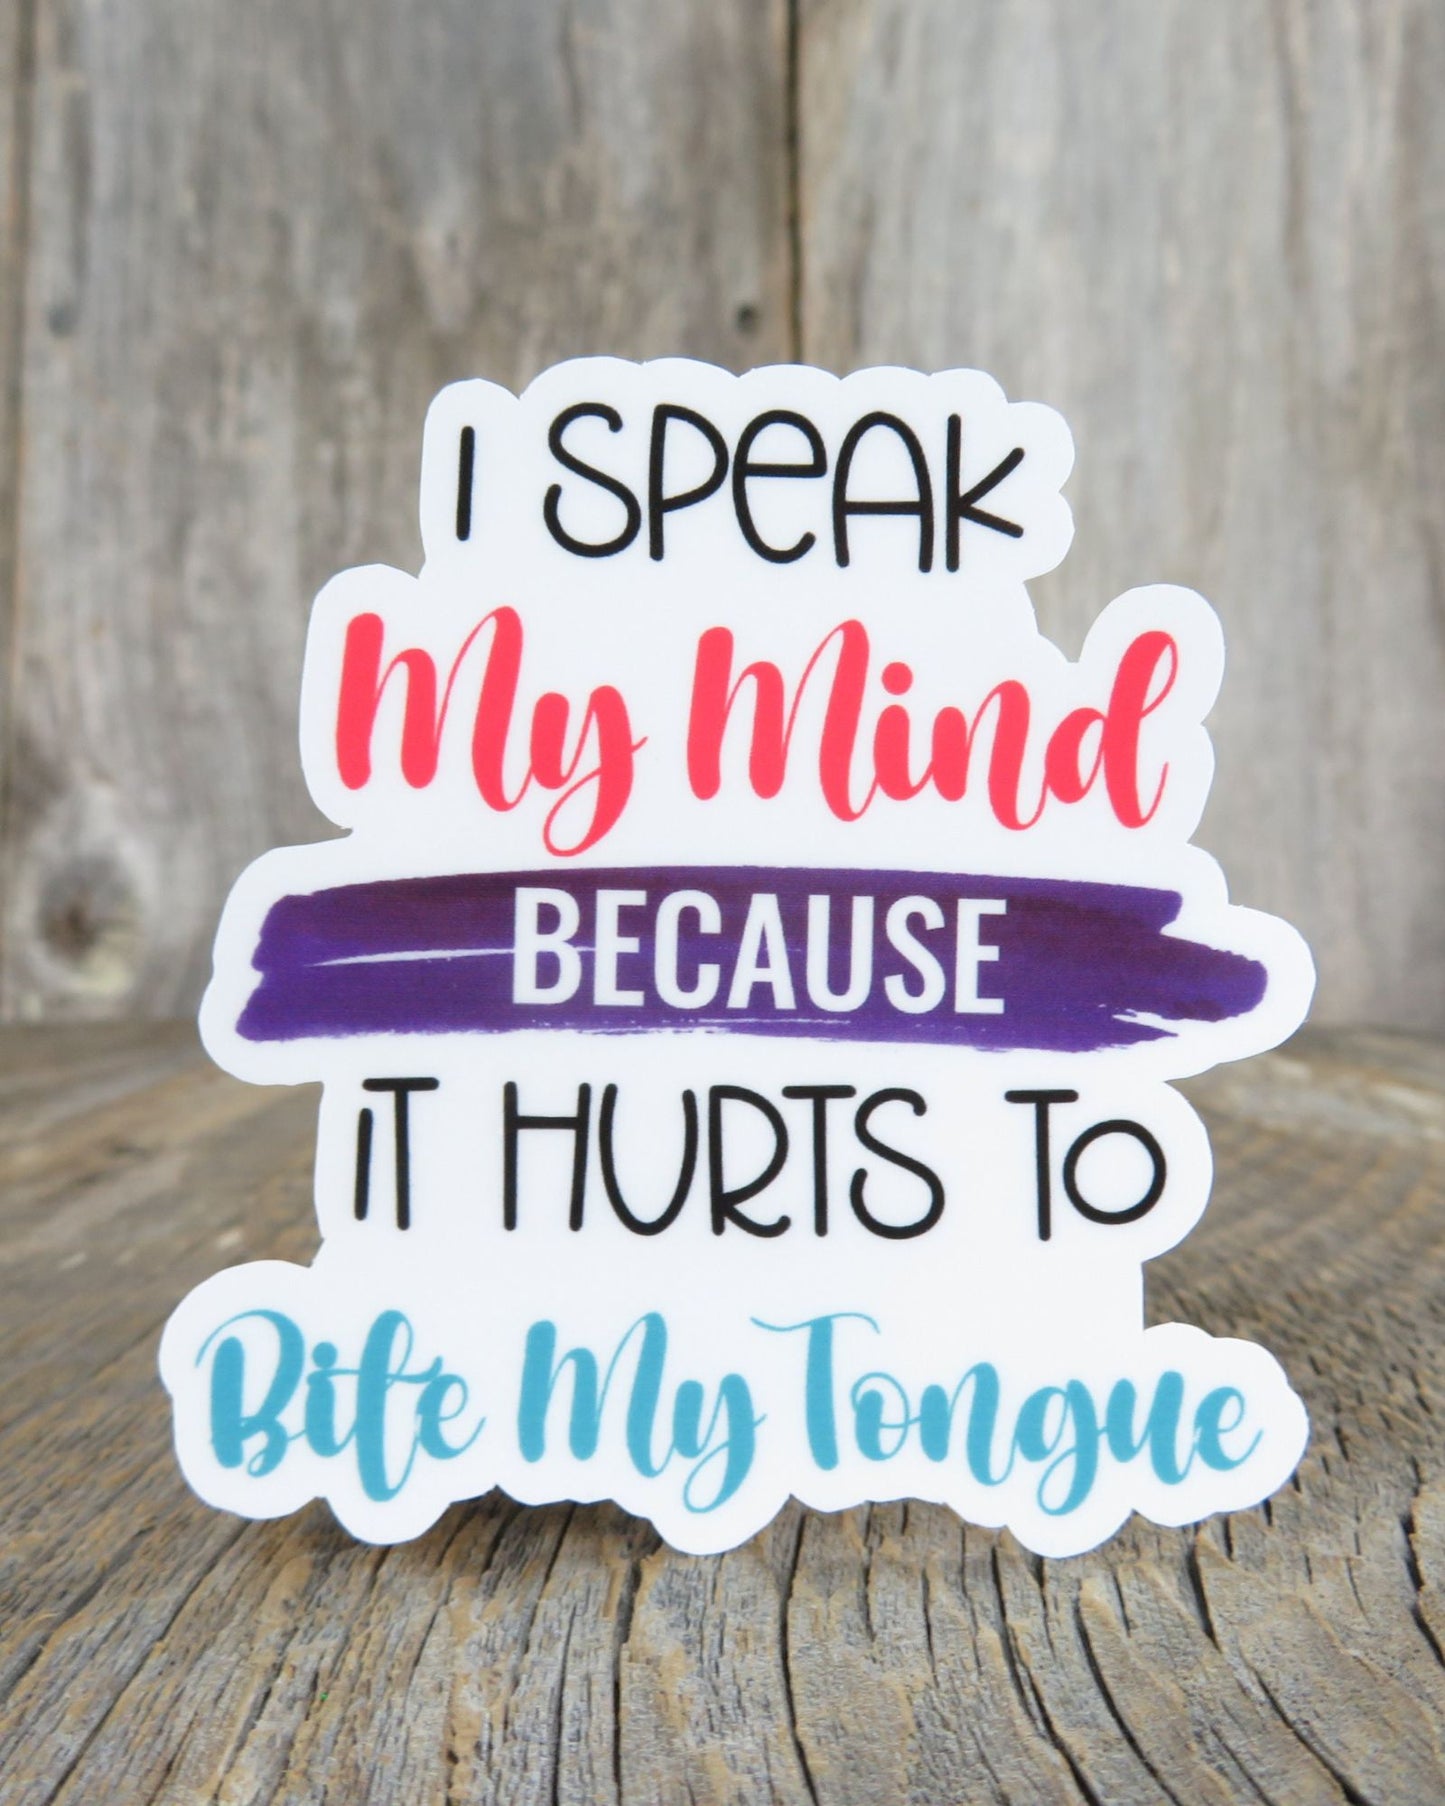 I Speak My Mind Because It Hurts To Bite My Tongue Sticker Full Color Social Funny Sarcastic Water Bottle Outspoken